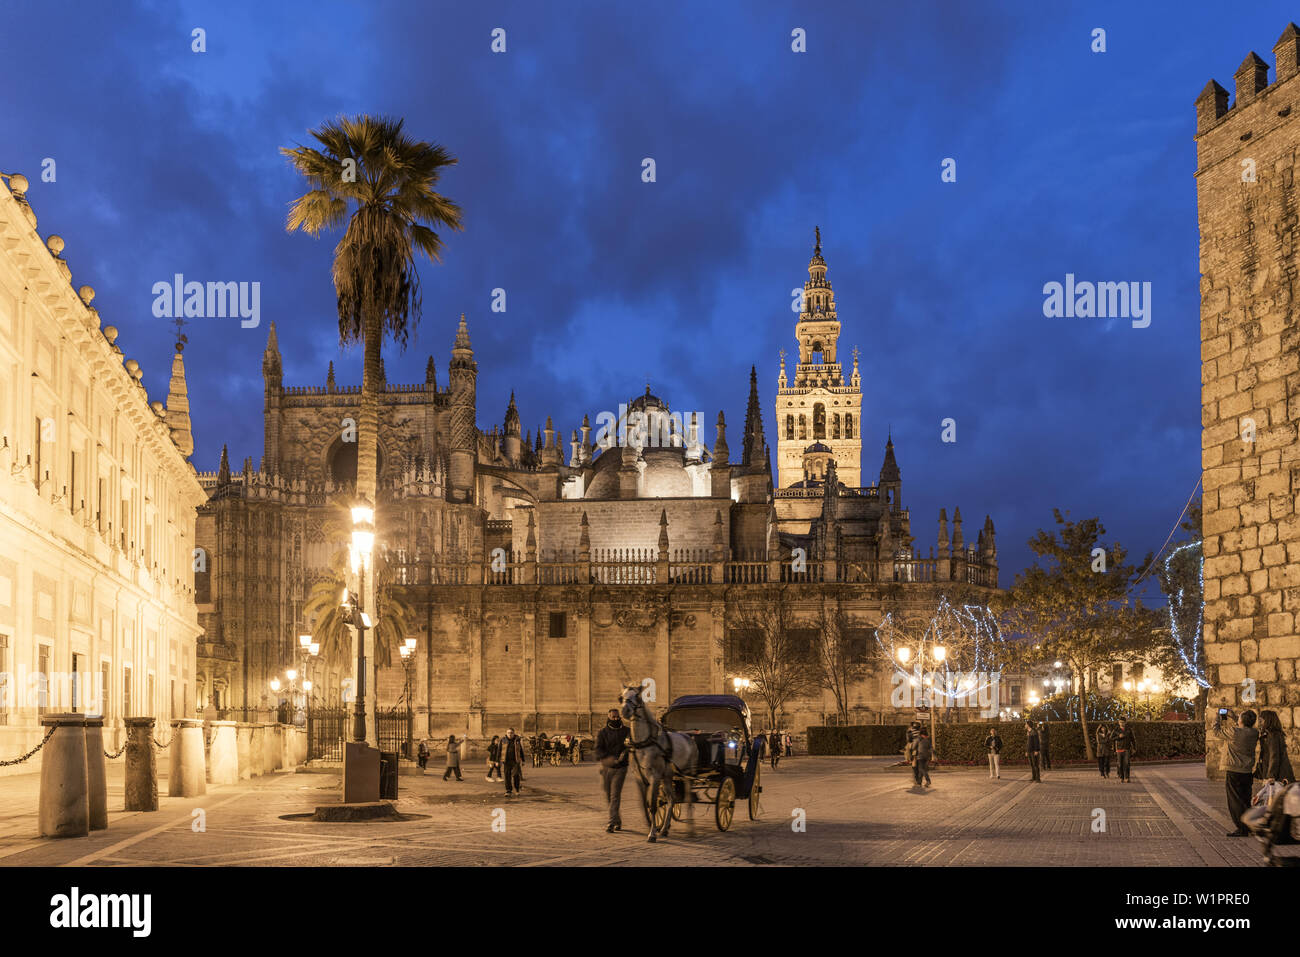 Cathedral of Seville, largest gothic cathedral in the world, Giralda, Clock tower, Carriage, Seville, Andalucia, Spain Stock Photo